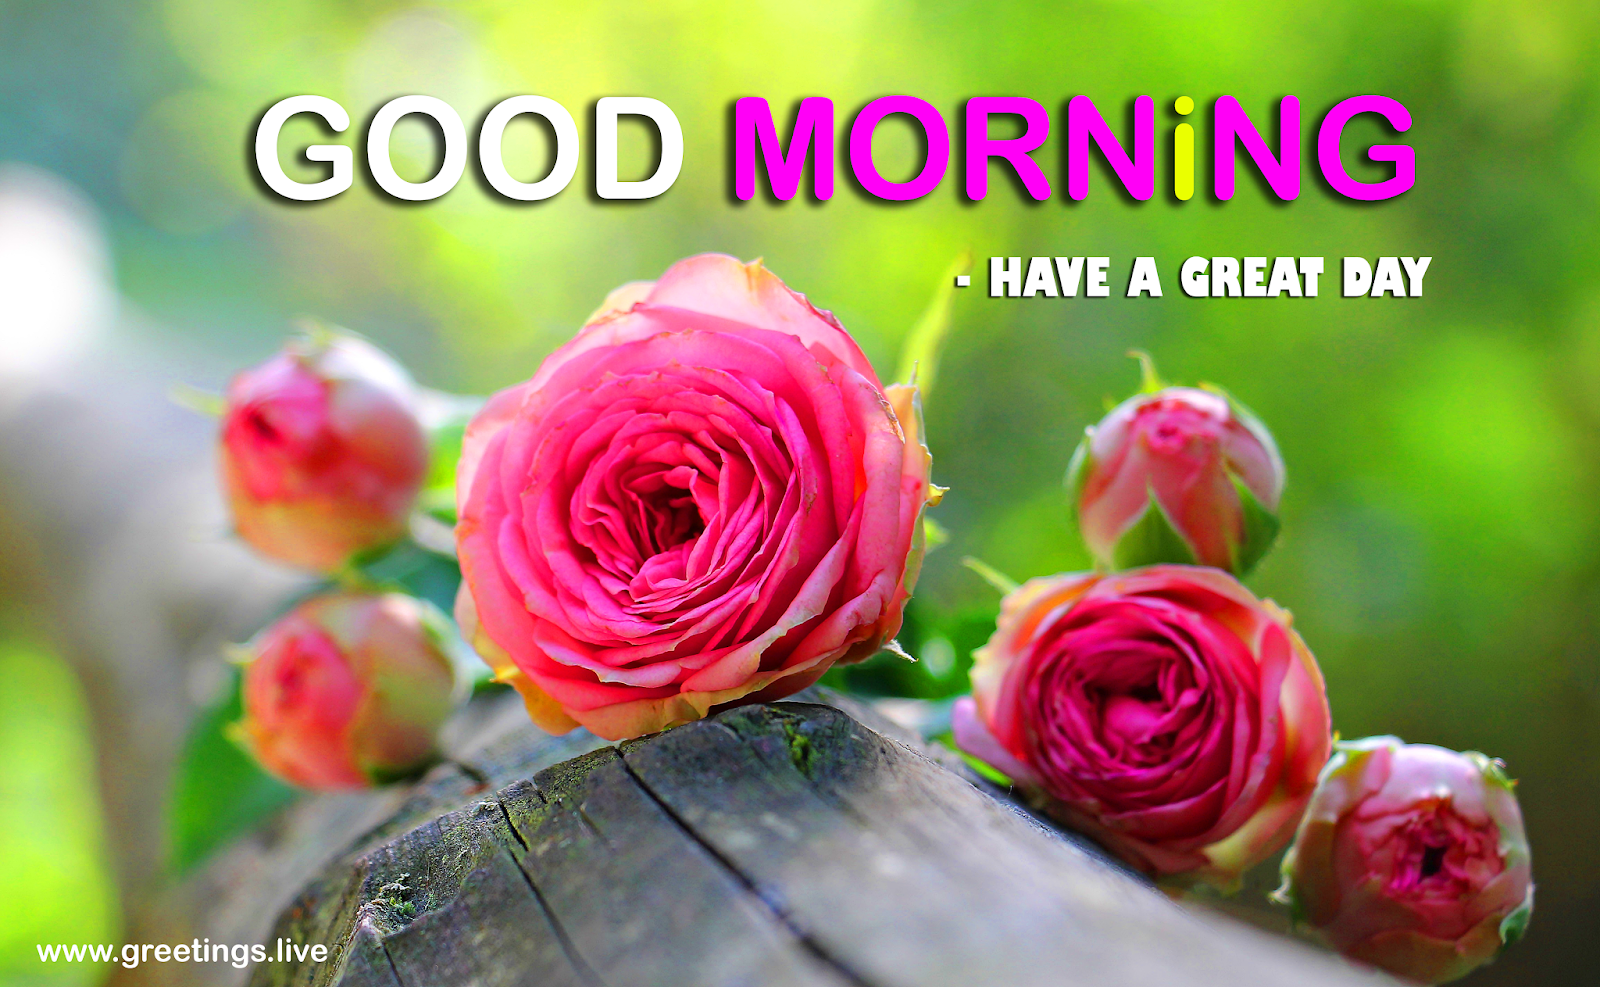 *Free Daily Greetings Pictures Festival GIF Images: Image of Rose  Flowers [Good Morning Greetings]